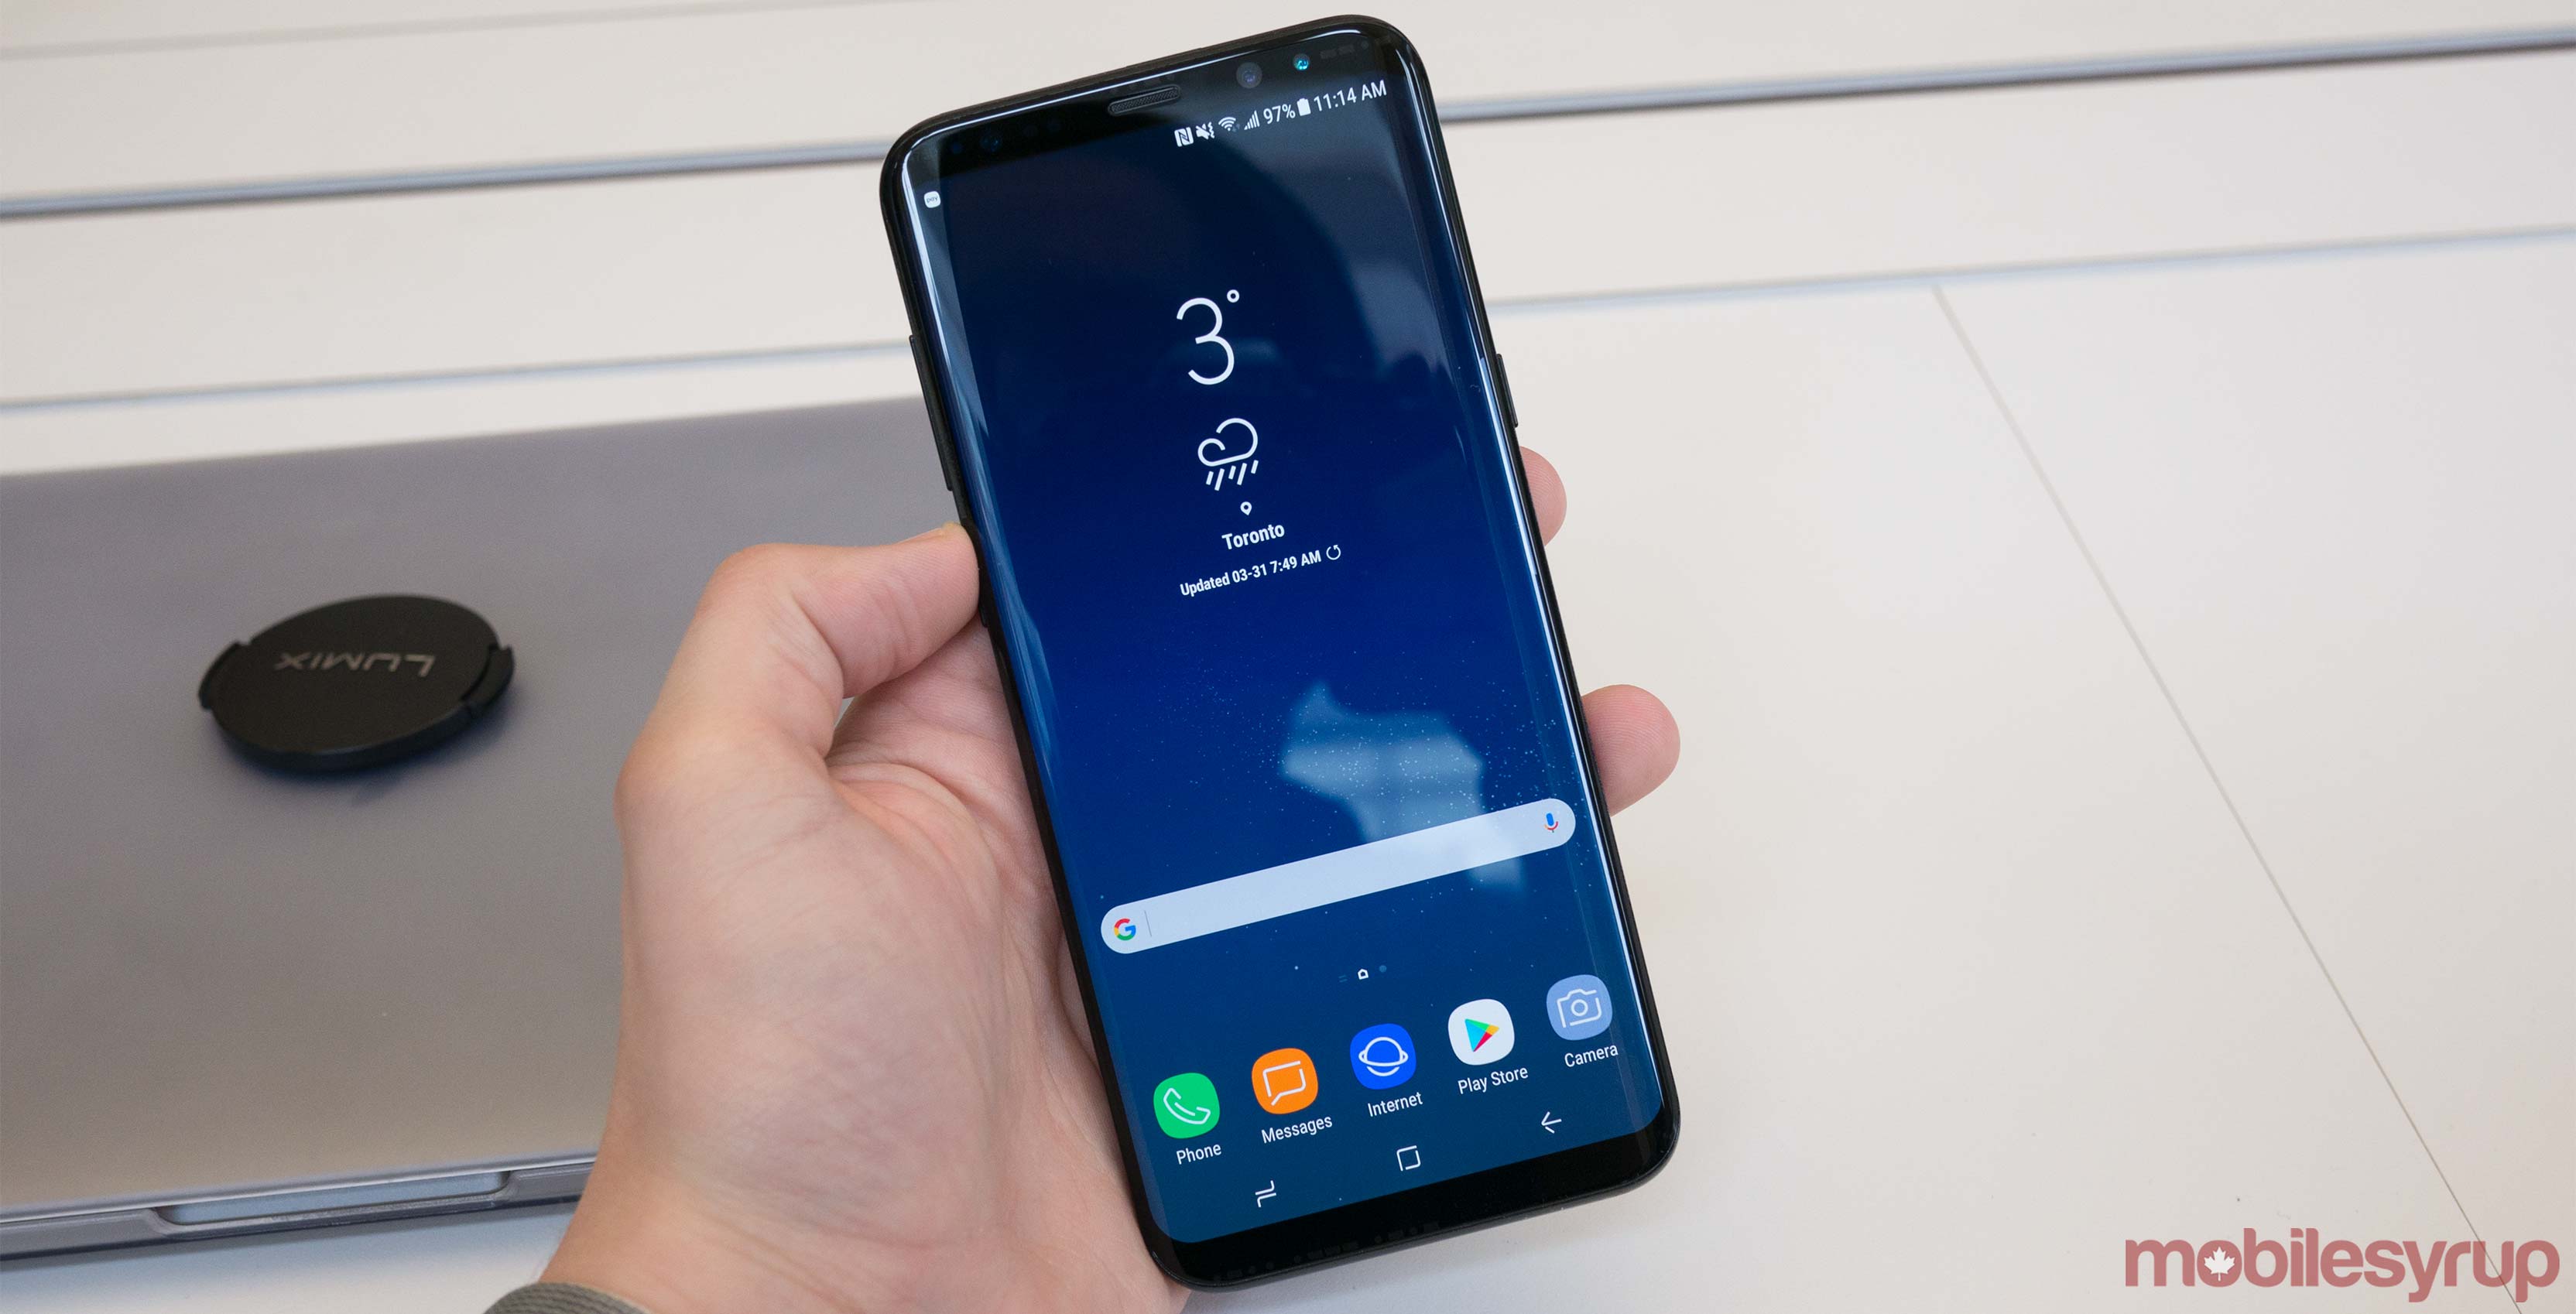 Samsung Galaxy S8 in the hand